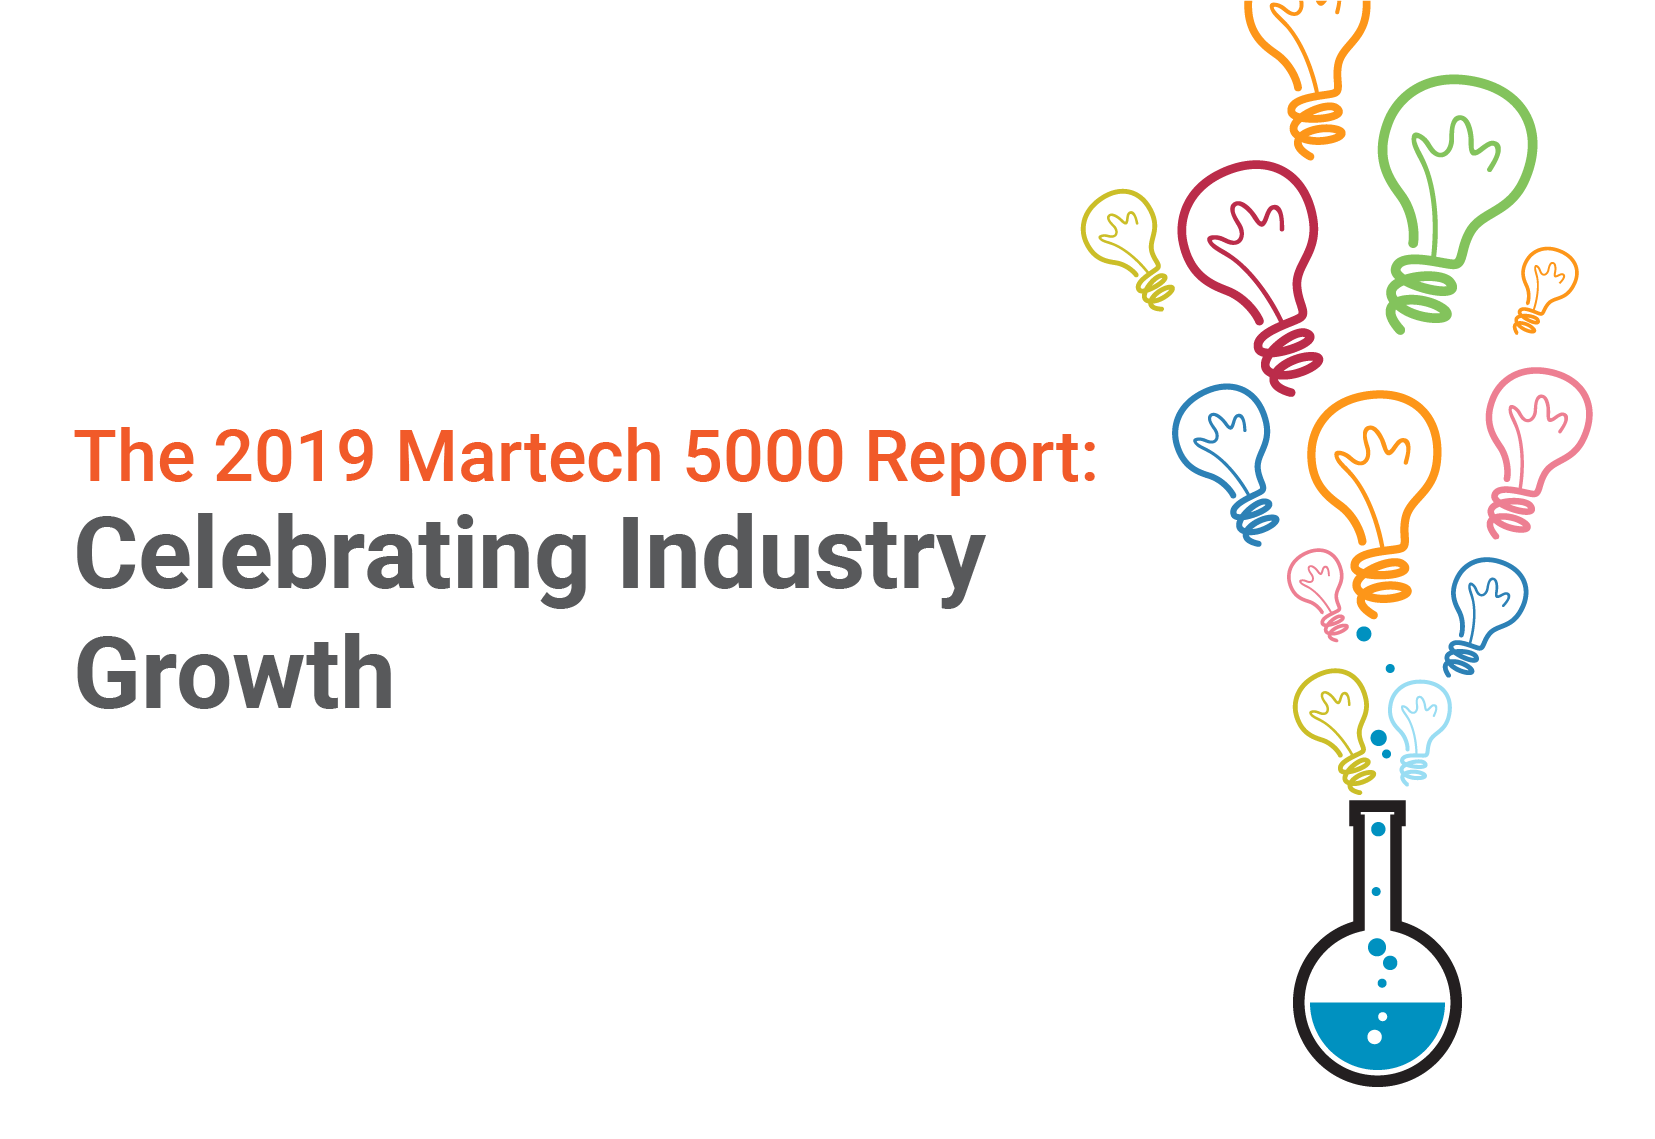 The 2019 Martech 5000 Report: Celebrating Industry Growth